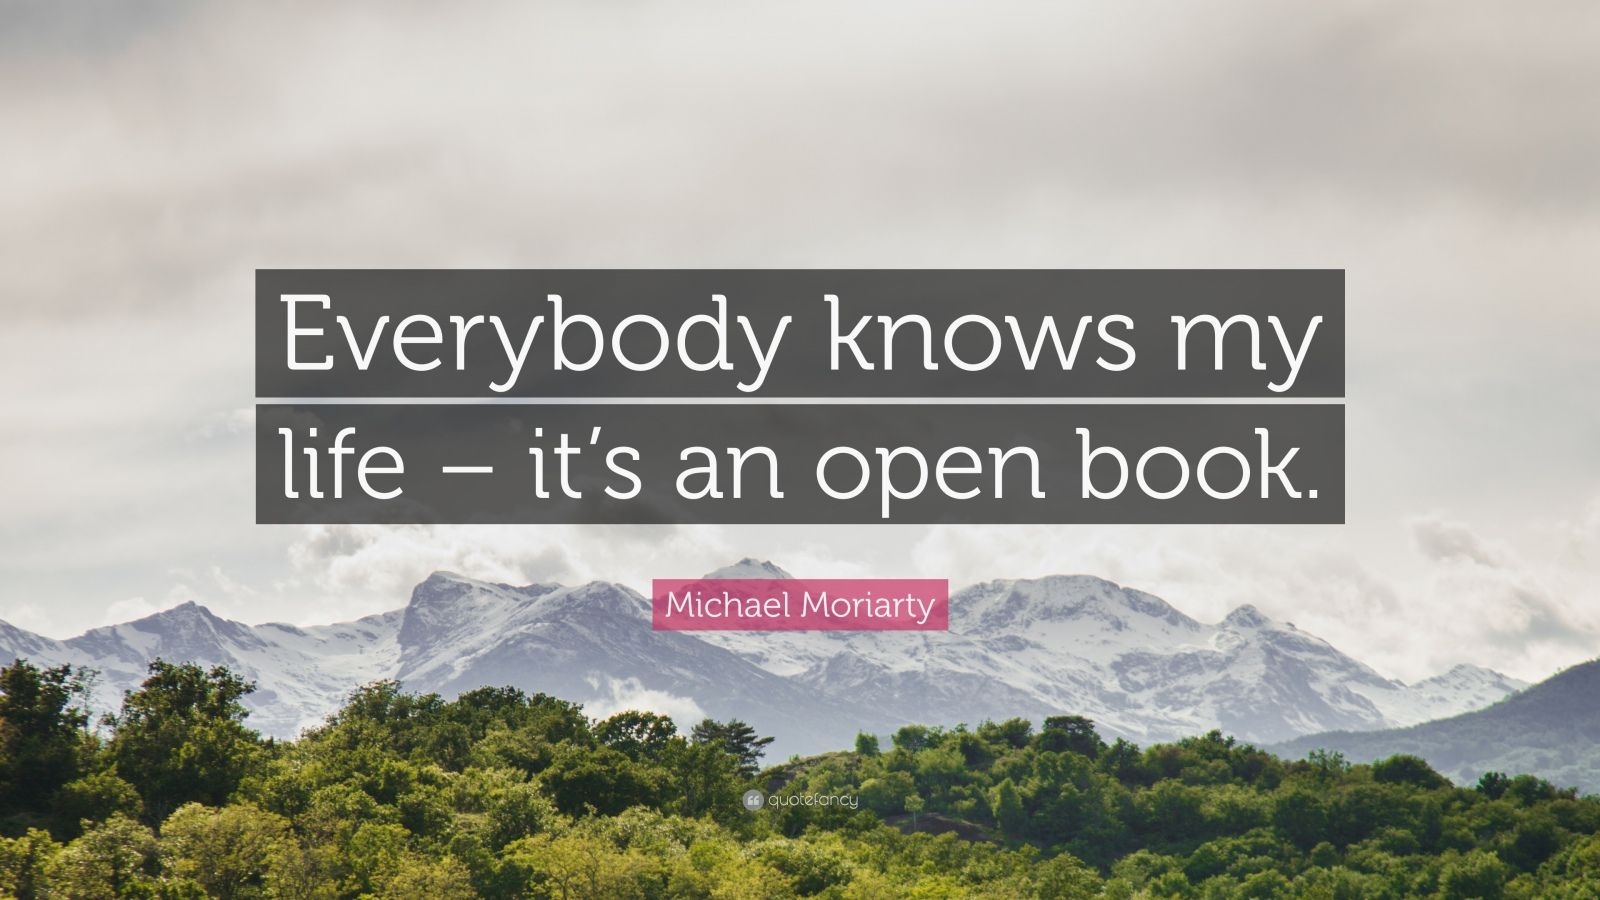 Michael Moriarty Quote: “Everybody knows my life – it’s an open book.”